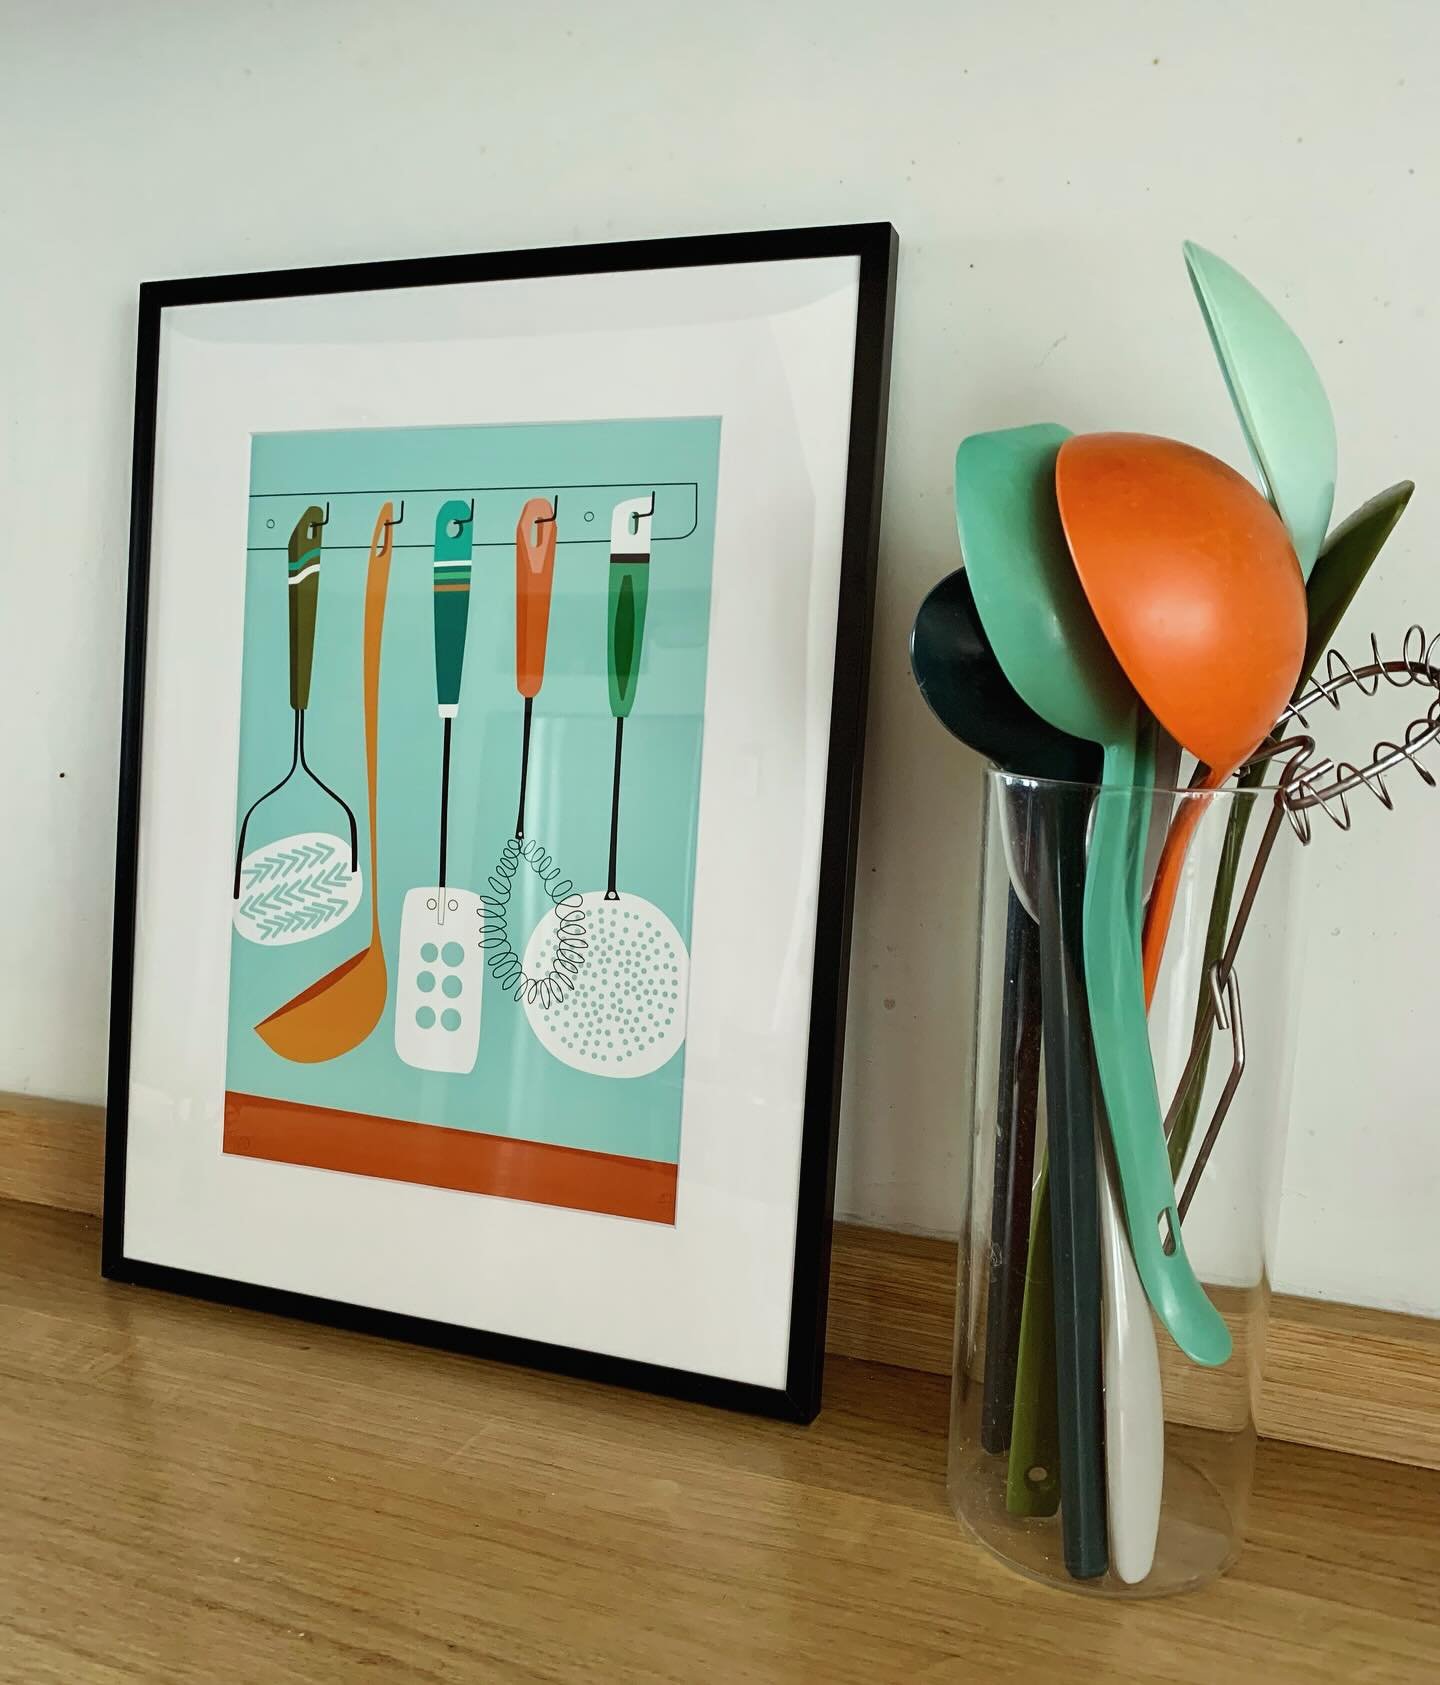 Quite pleased with how my &lsquo;Retro Kitchen Utensil&rsquo; gicl&eacute;e print has turned out! Probably because I have a huge collection of retro utensils myself - can&rsquo;t resist a melamine ladle!

This is only a little A4 version but popped i